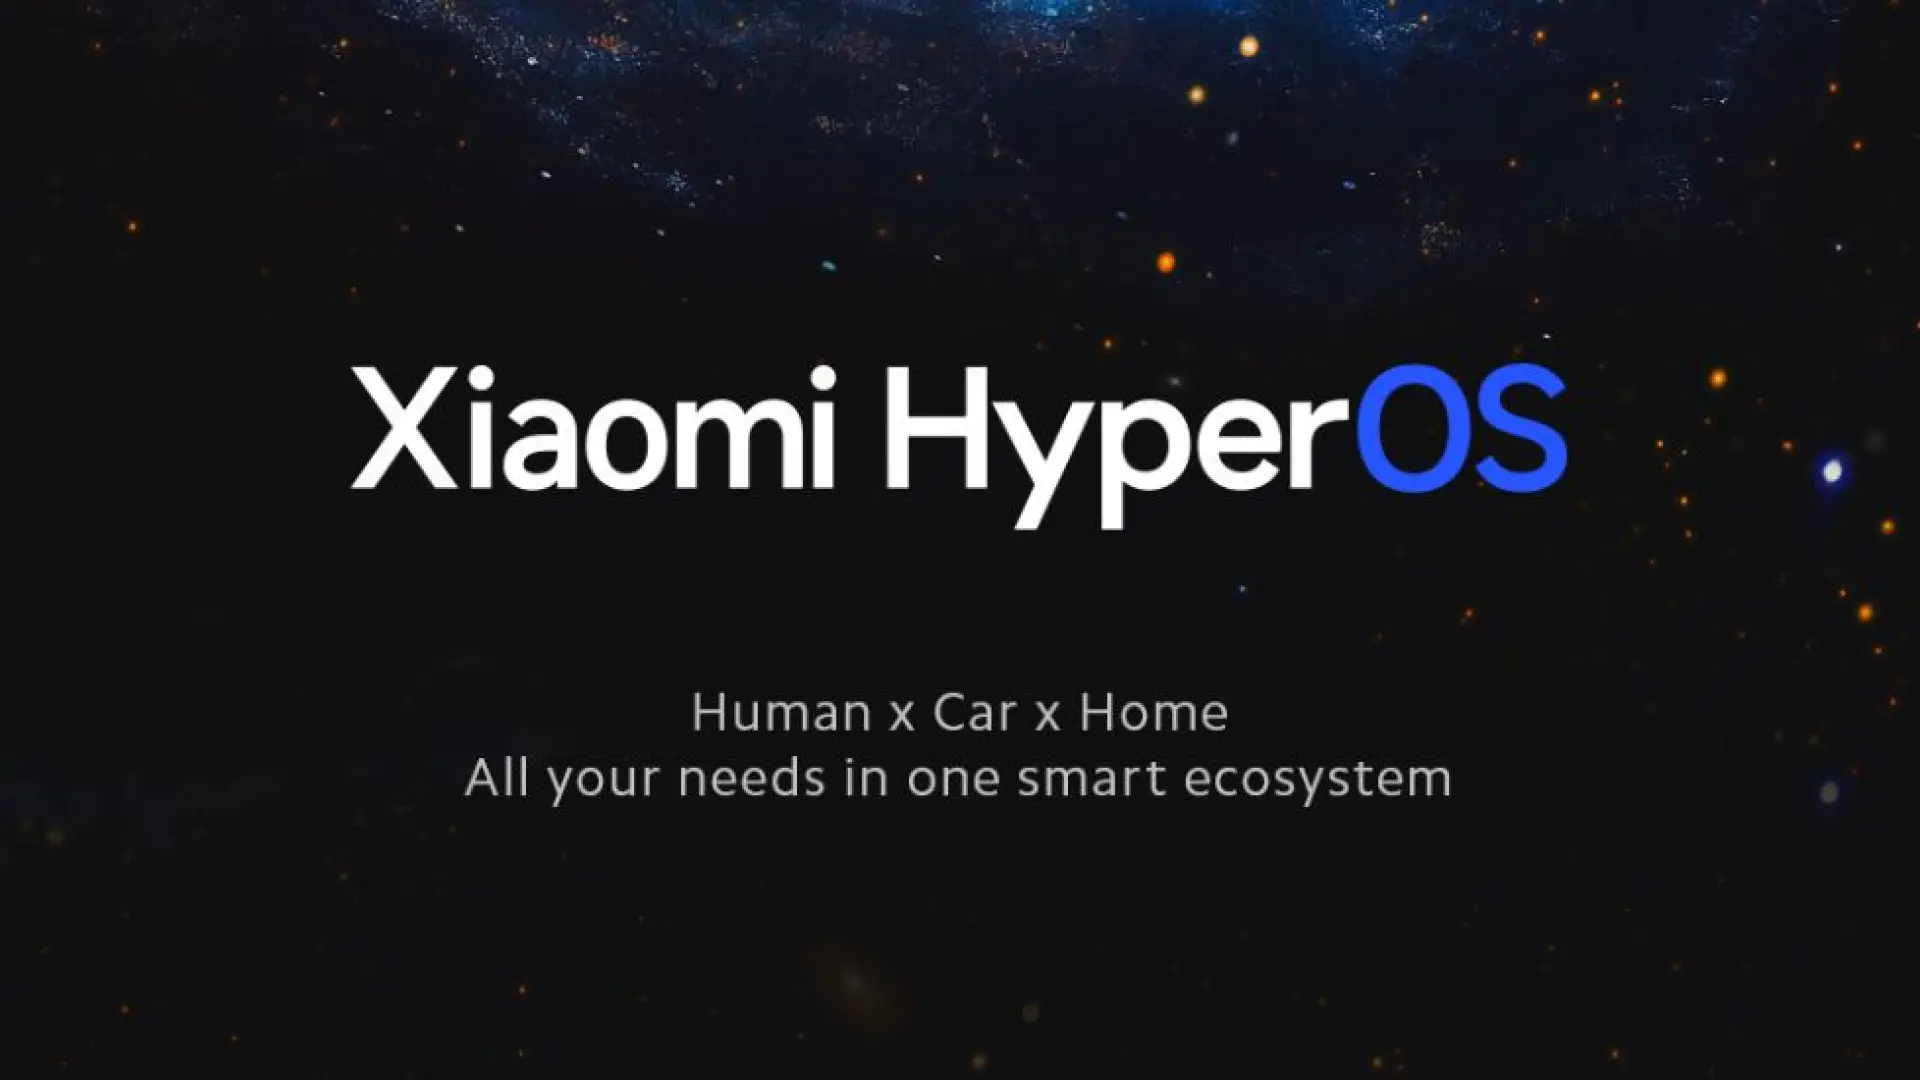 14 Xiaomi smartphones, tablets and TVs will get HyperOS operating system as early as winter